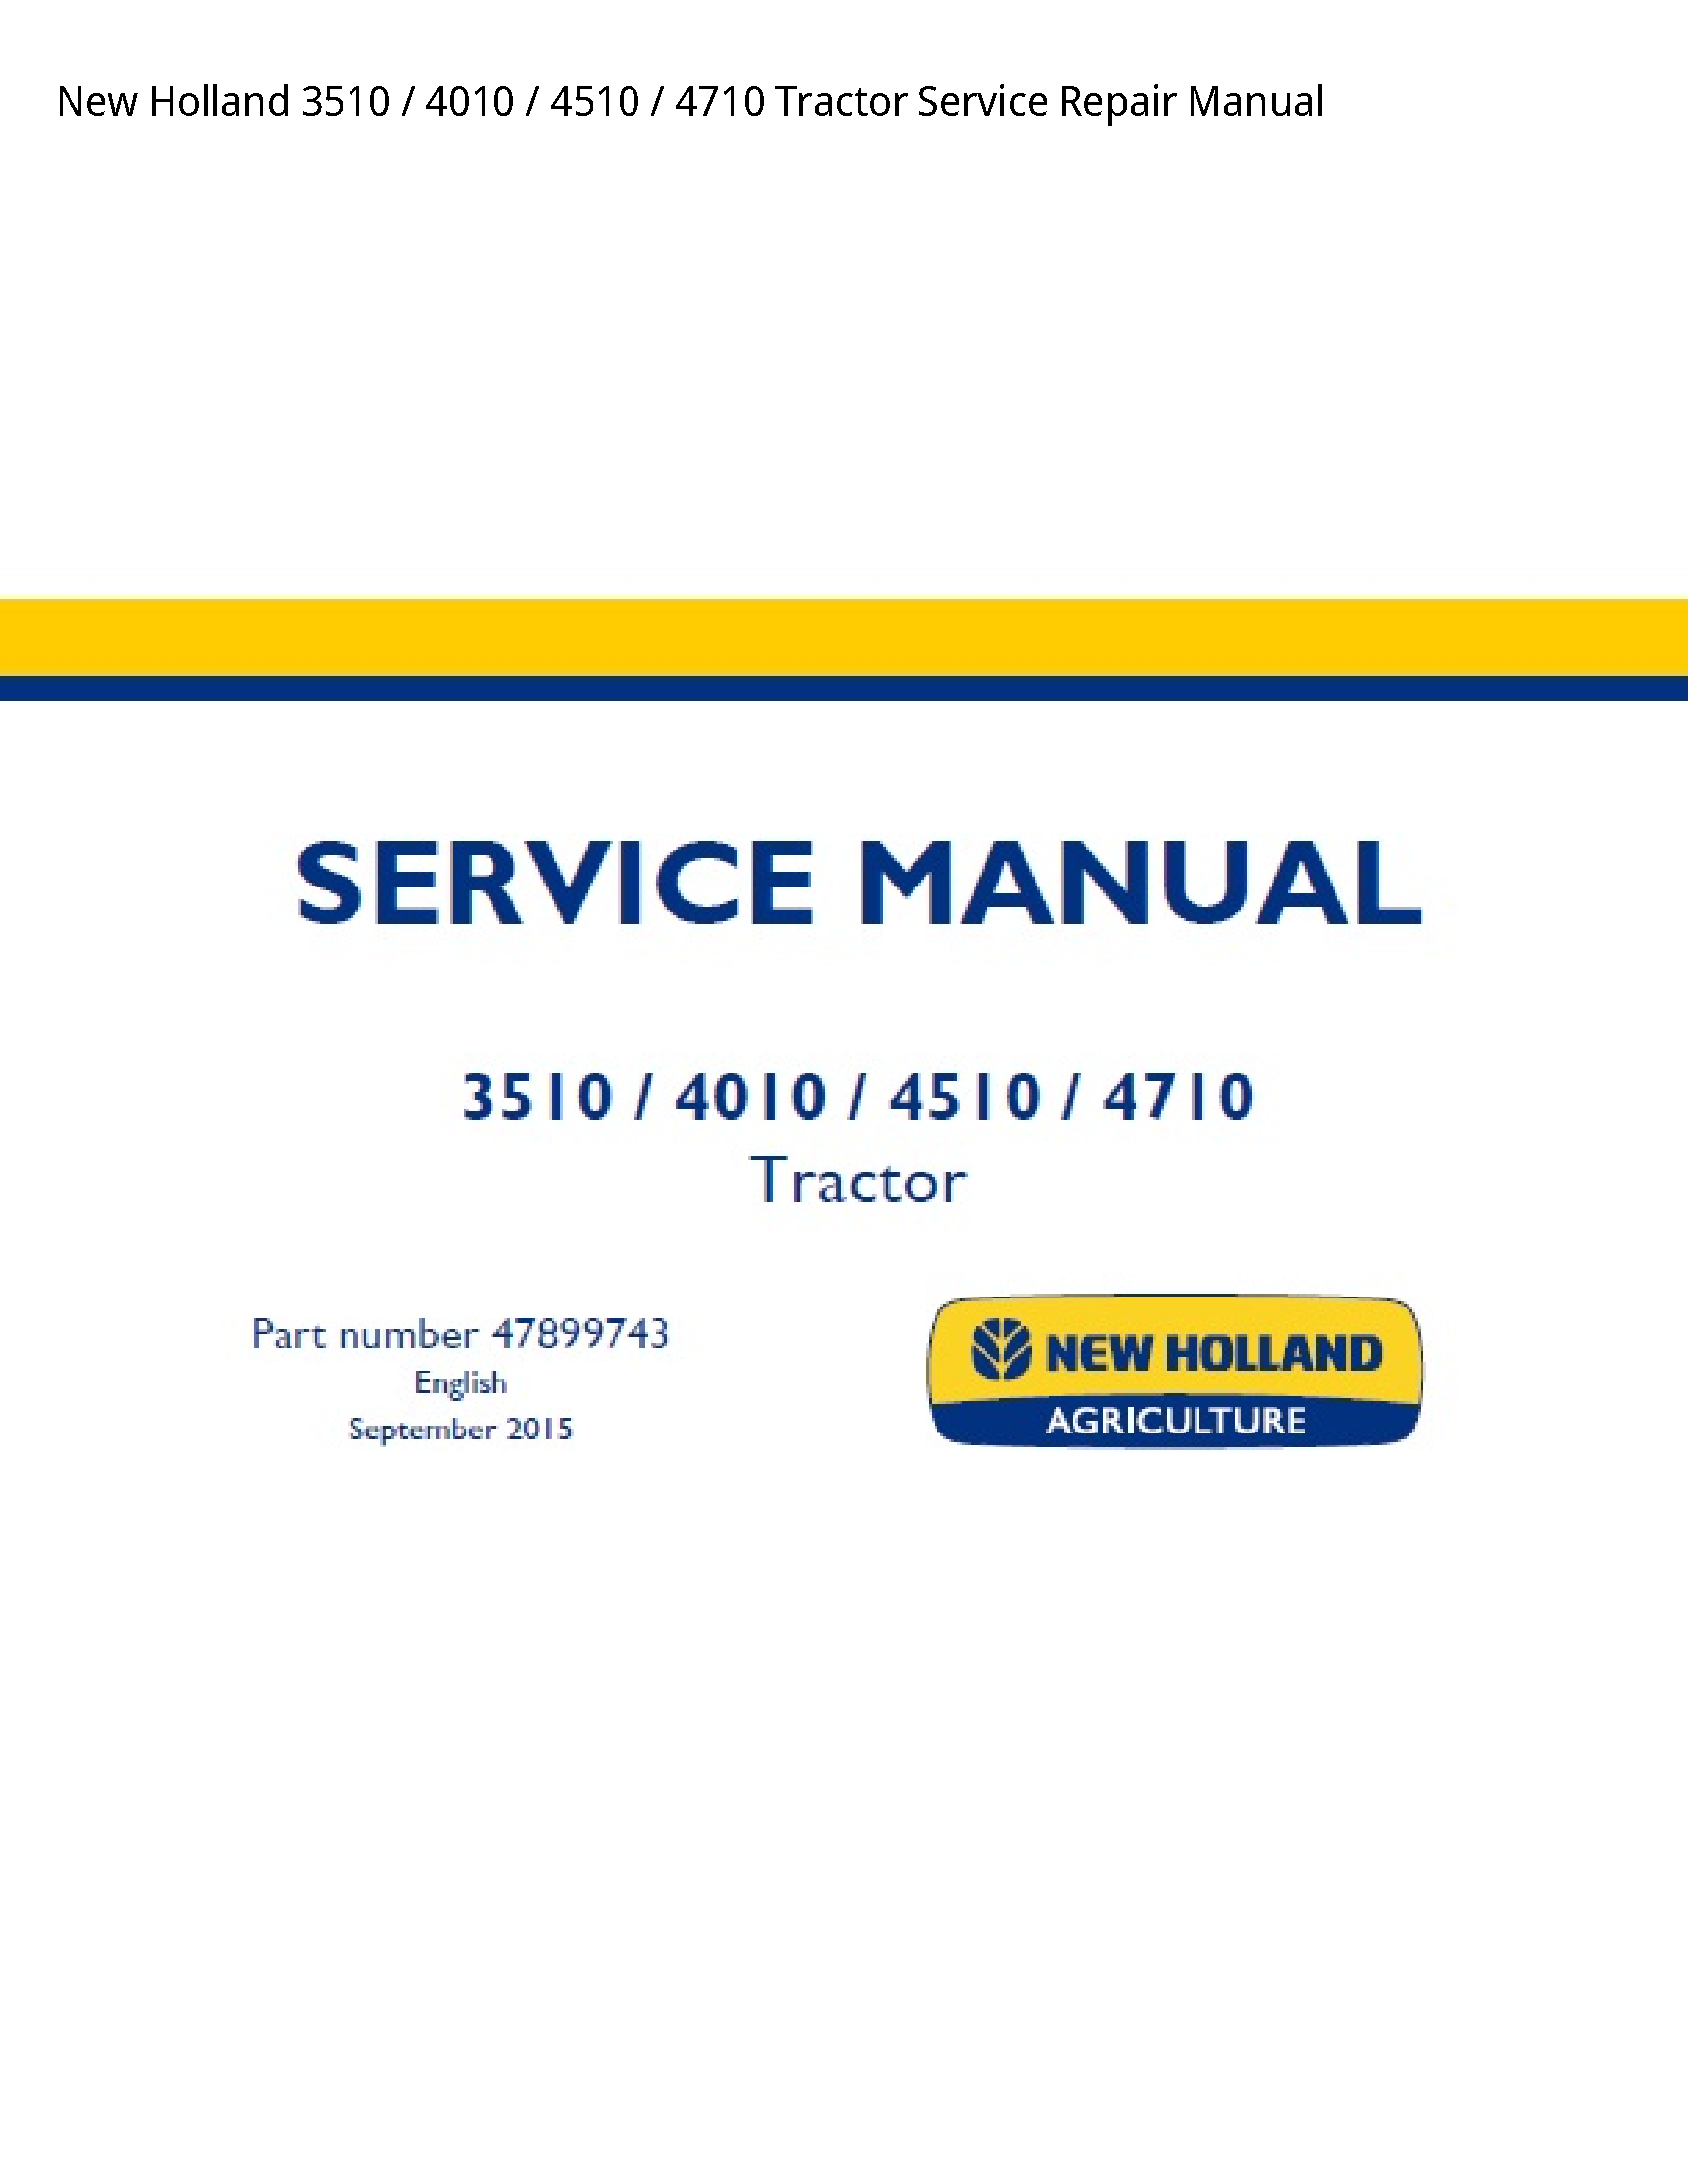 New Holland 3510 Tractor manual